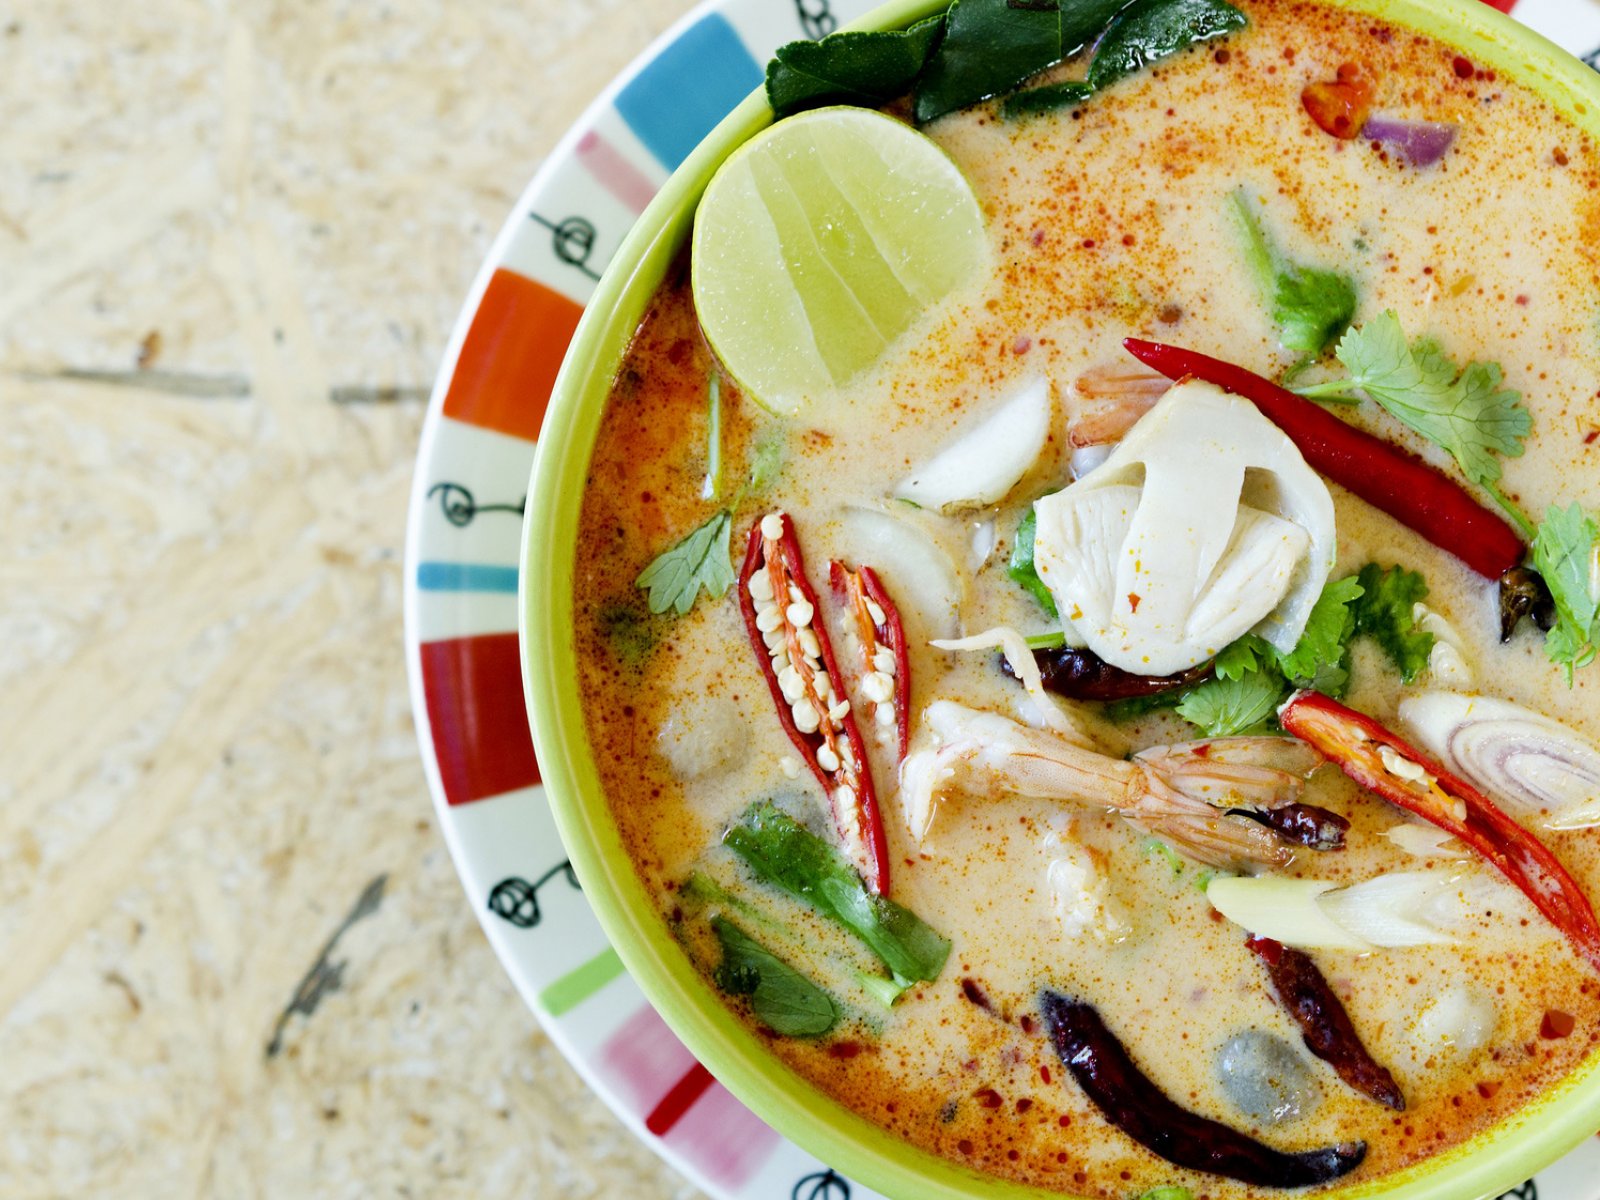 How to try Tom Yam in Bangkok